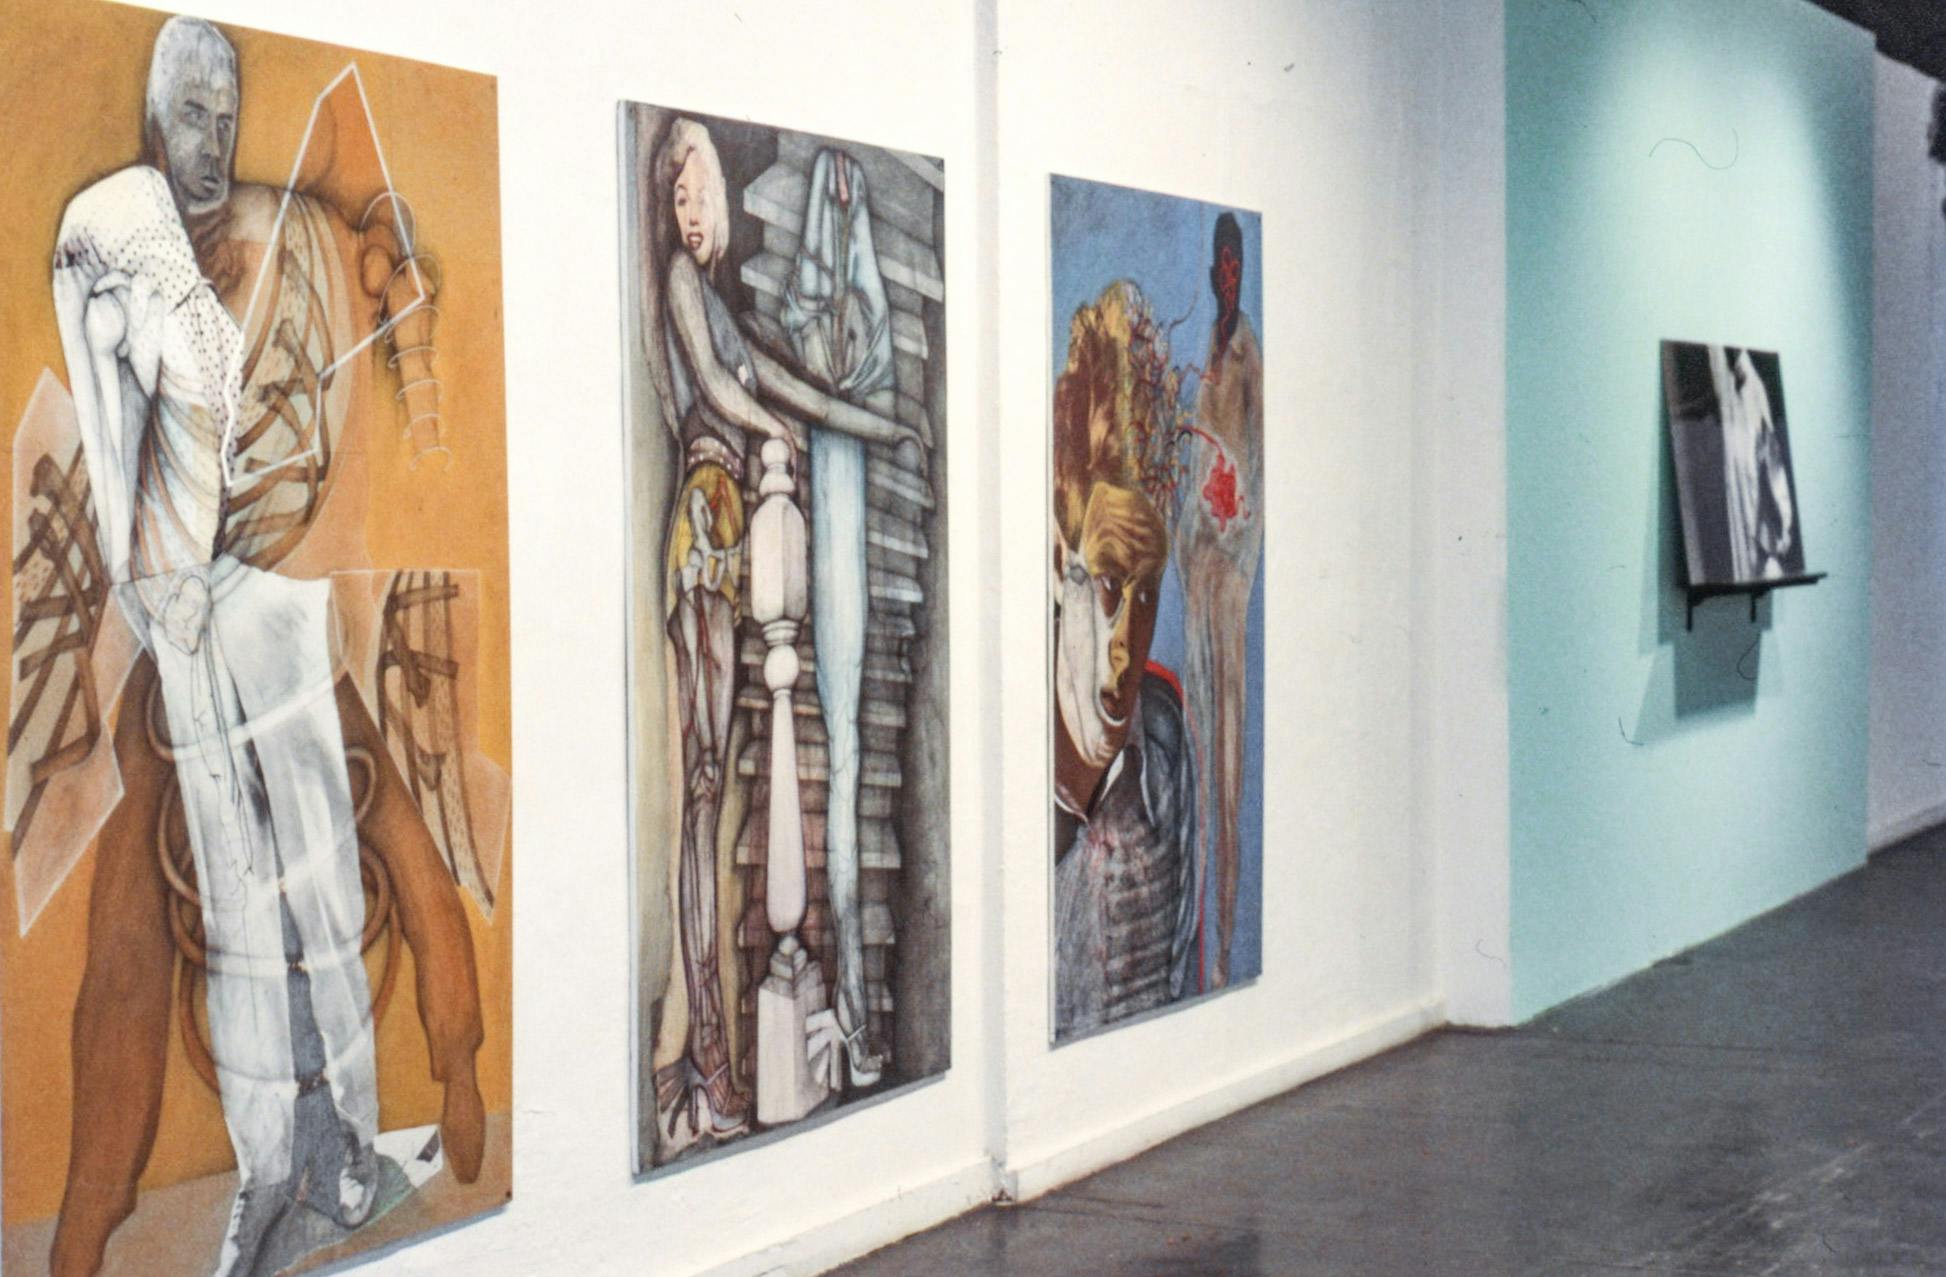 Three large paintings and a photo on the wall of a gallery. The paintings show Marlon Brando, Marilyn Monroe, and James Dean, each with anatomical drawings and mechanical images collaged on them.